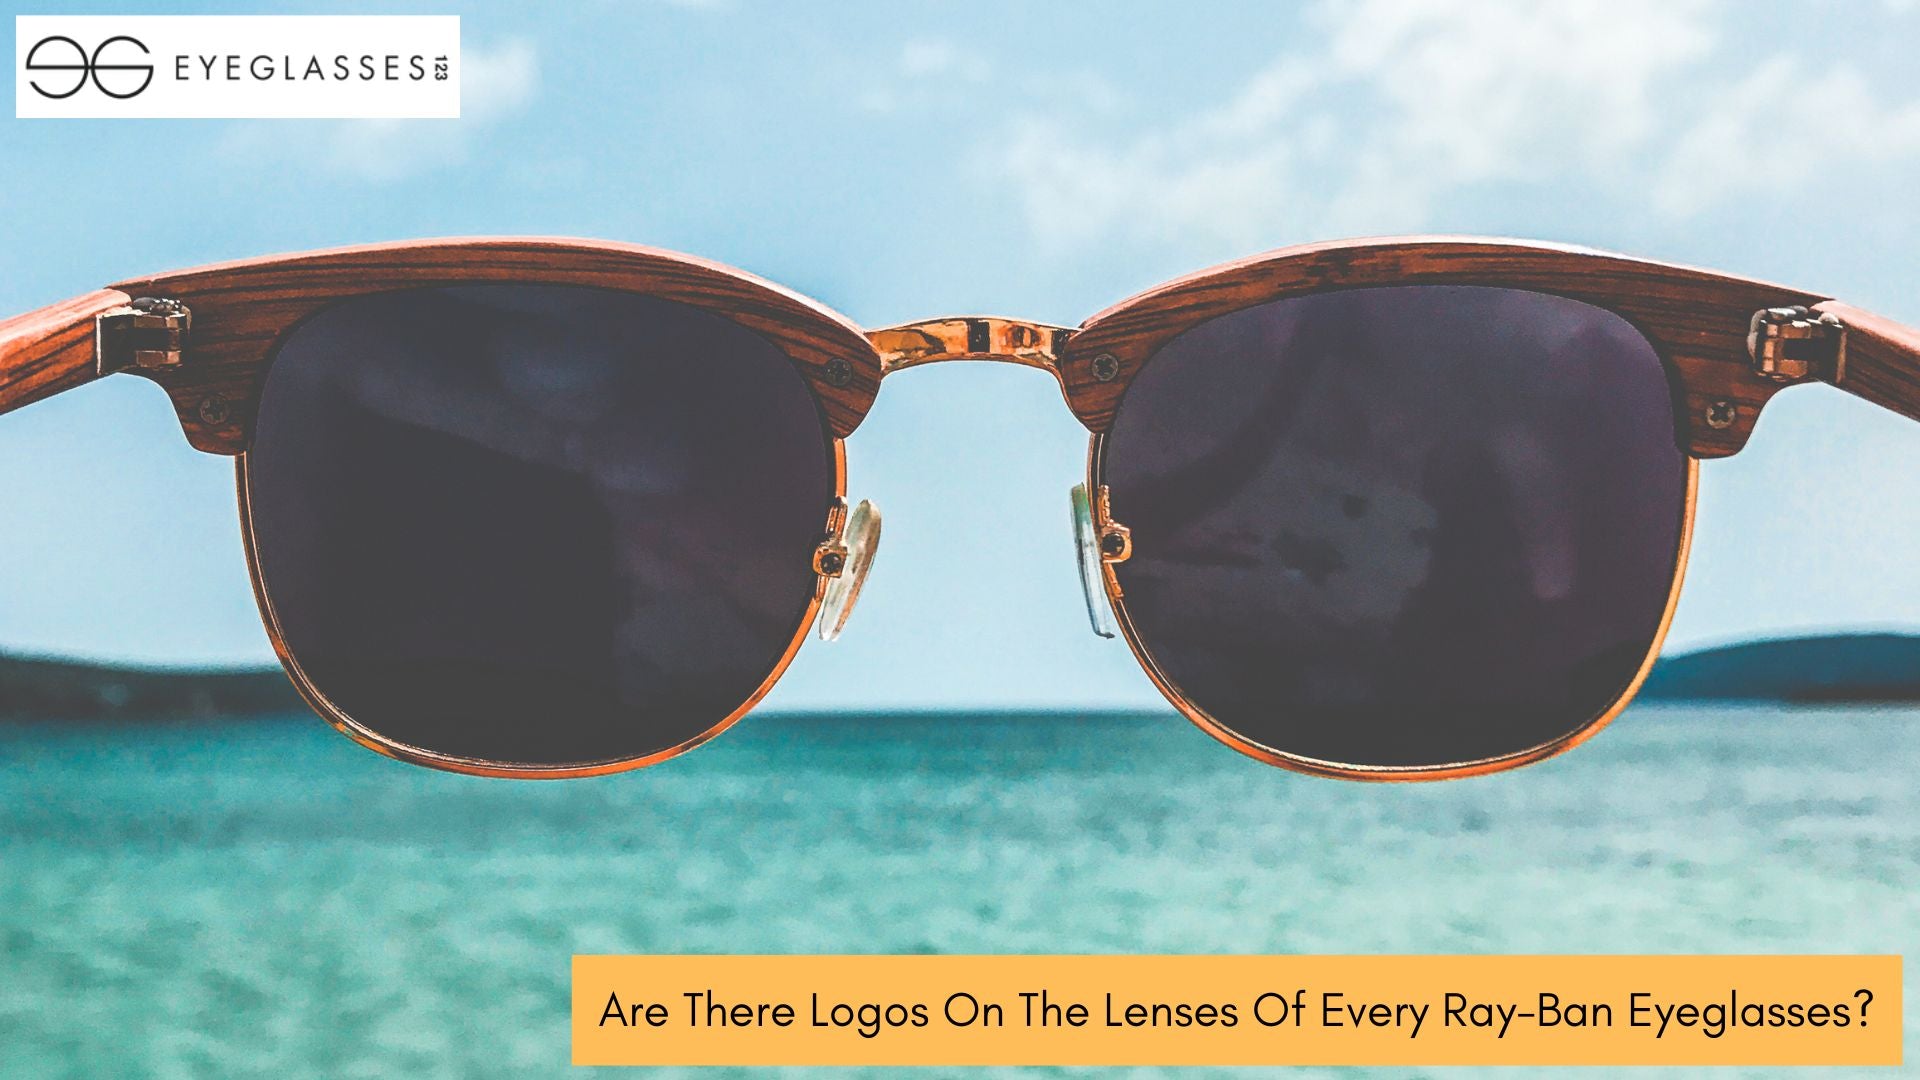 Are There Logos On The Lenses Of Every Ray-Ban Eyeglasses?